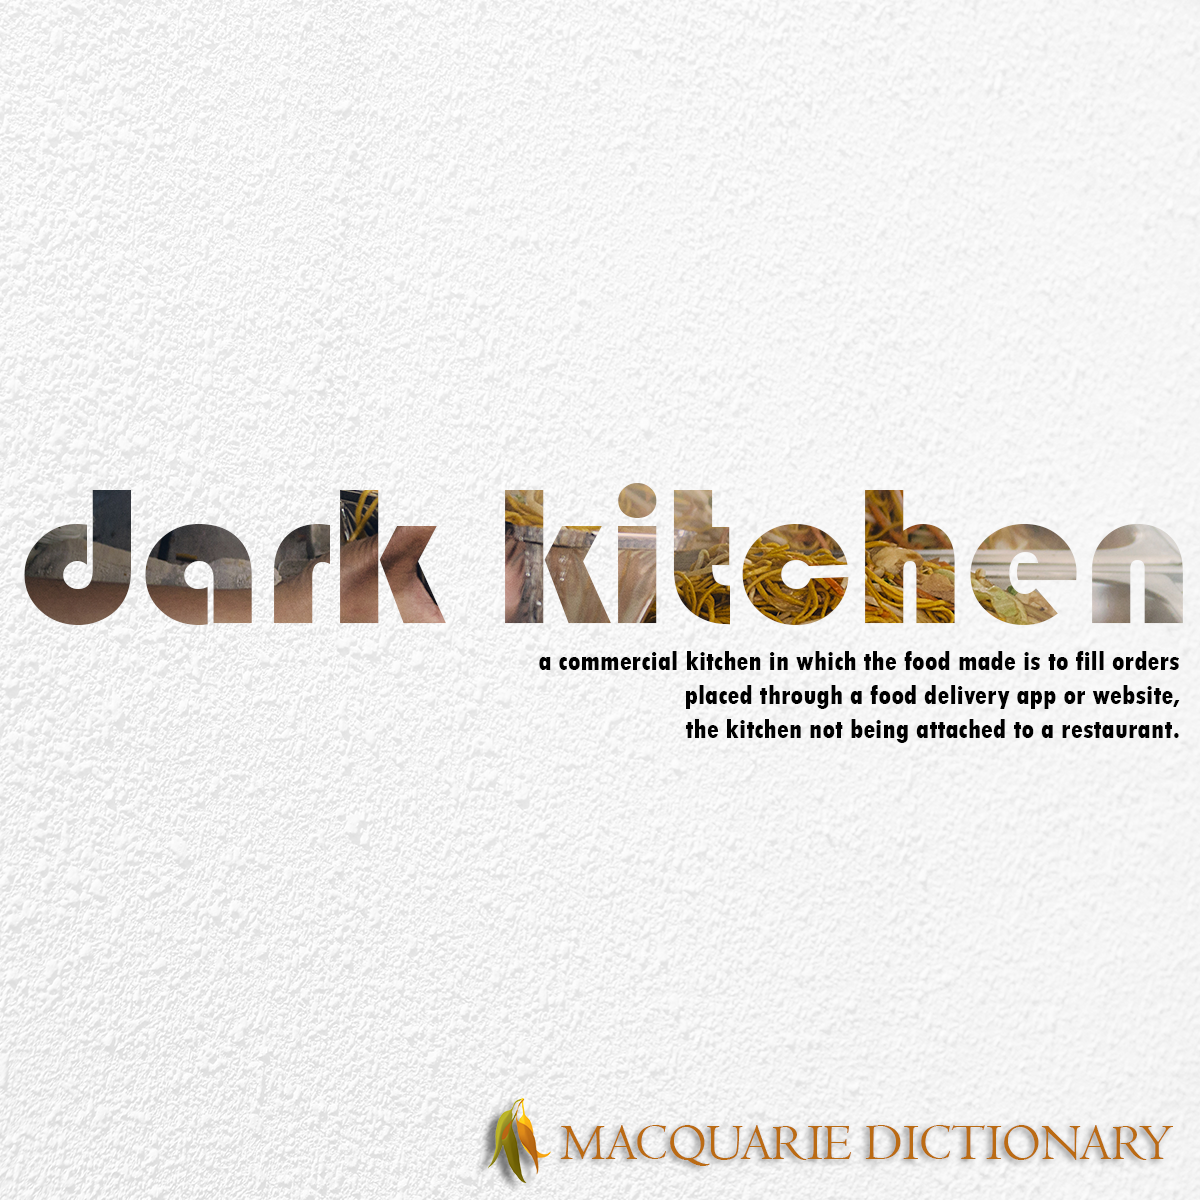 Image of Macquarie Dictionary Word of the Year - dark kitchen - a commercial kitchen in which the food made is to fill orders placed through a food delivery app or website, the kitchen not being attached to a restaurant.